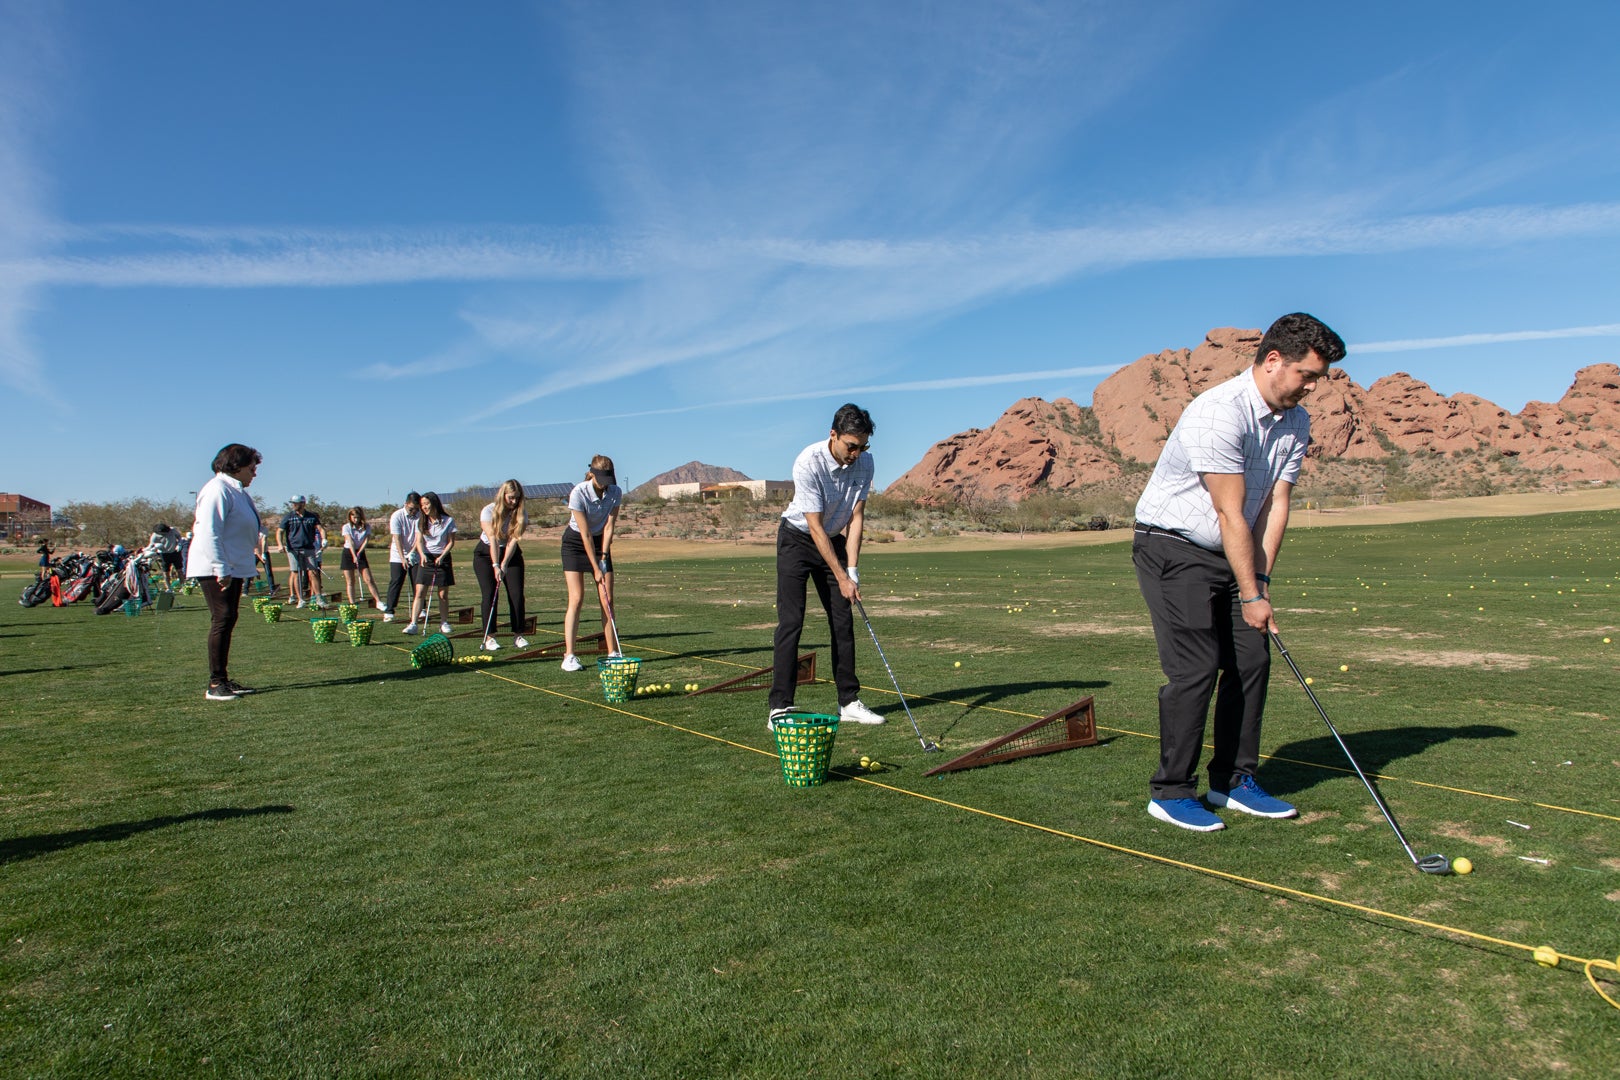 ASU Law students participating in the Grads to Golf program. Student lined up about to hit a gold ball with a golf club on the driving range.